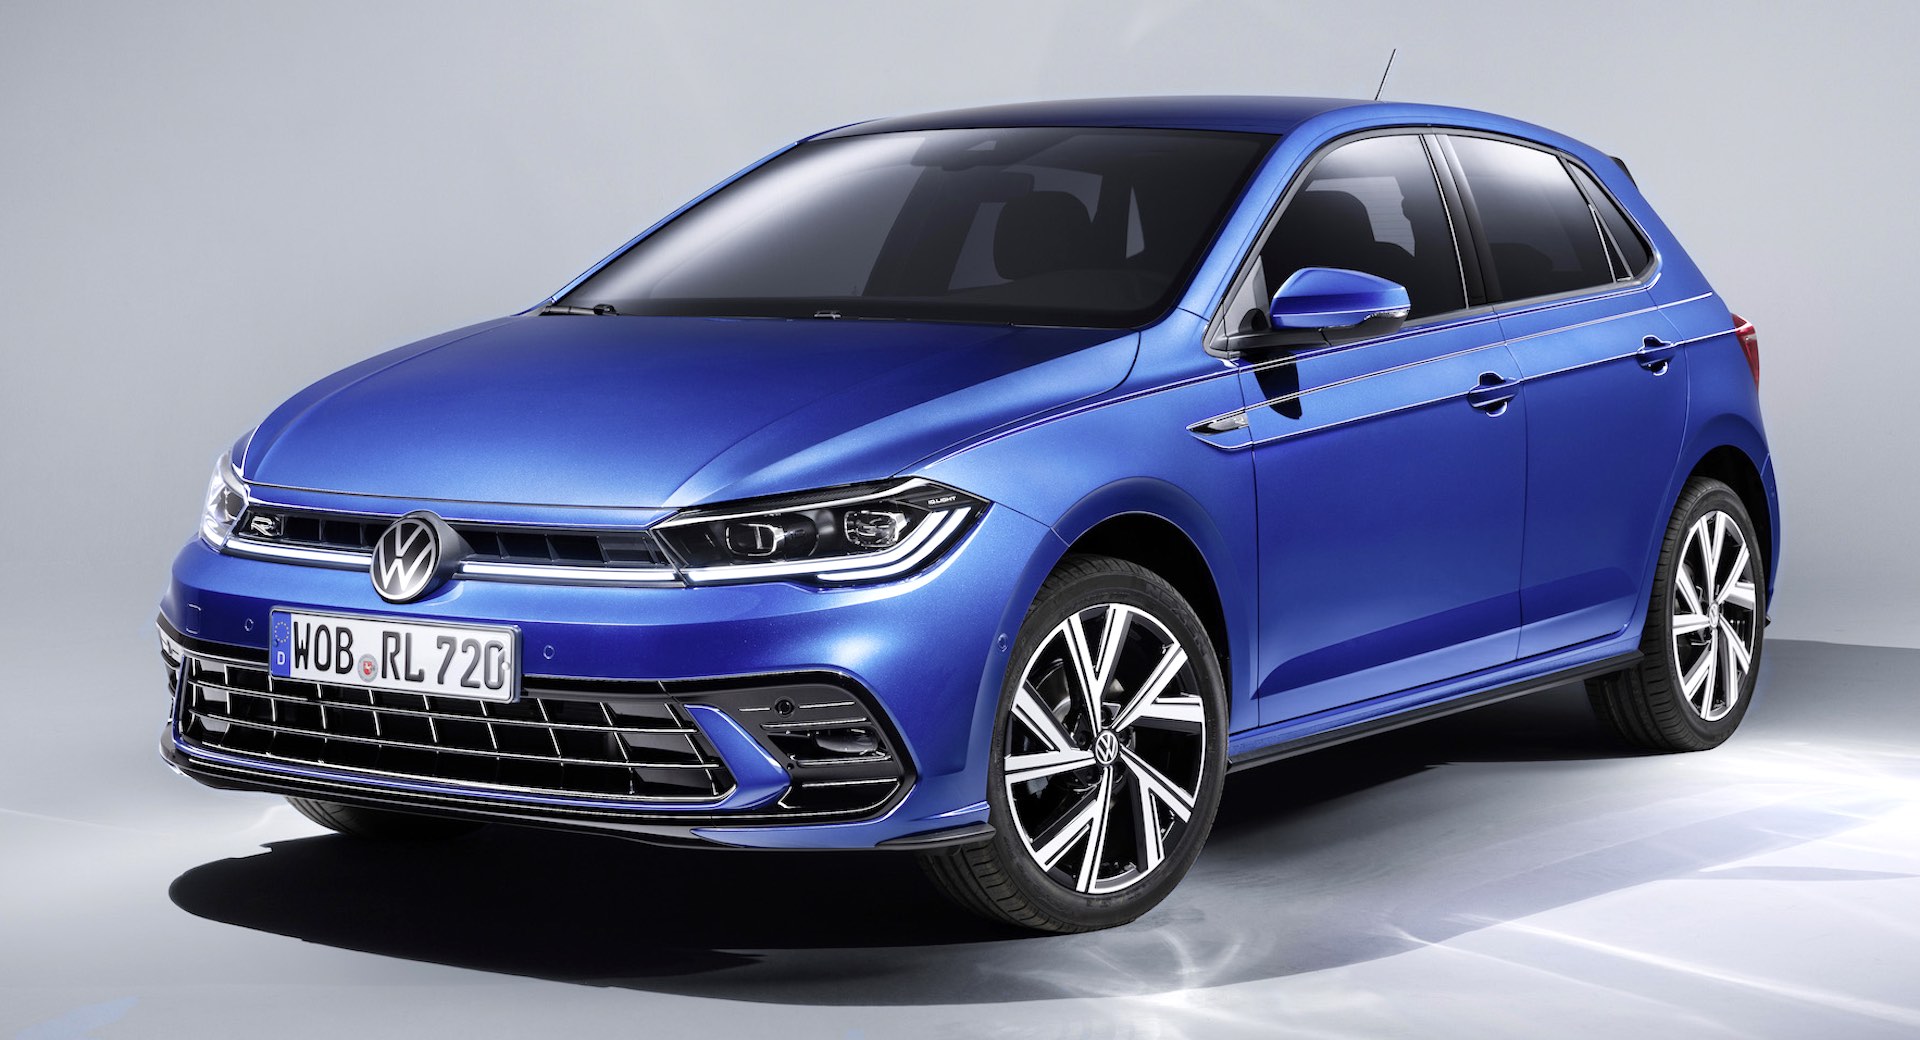 Facelifted 2021 Volkswagen Polo On Sale In UK From £17,885